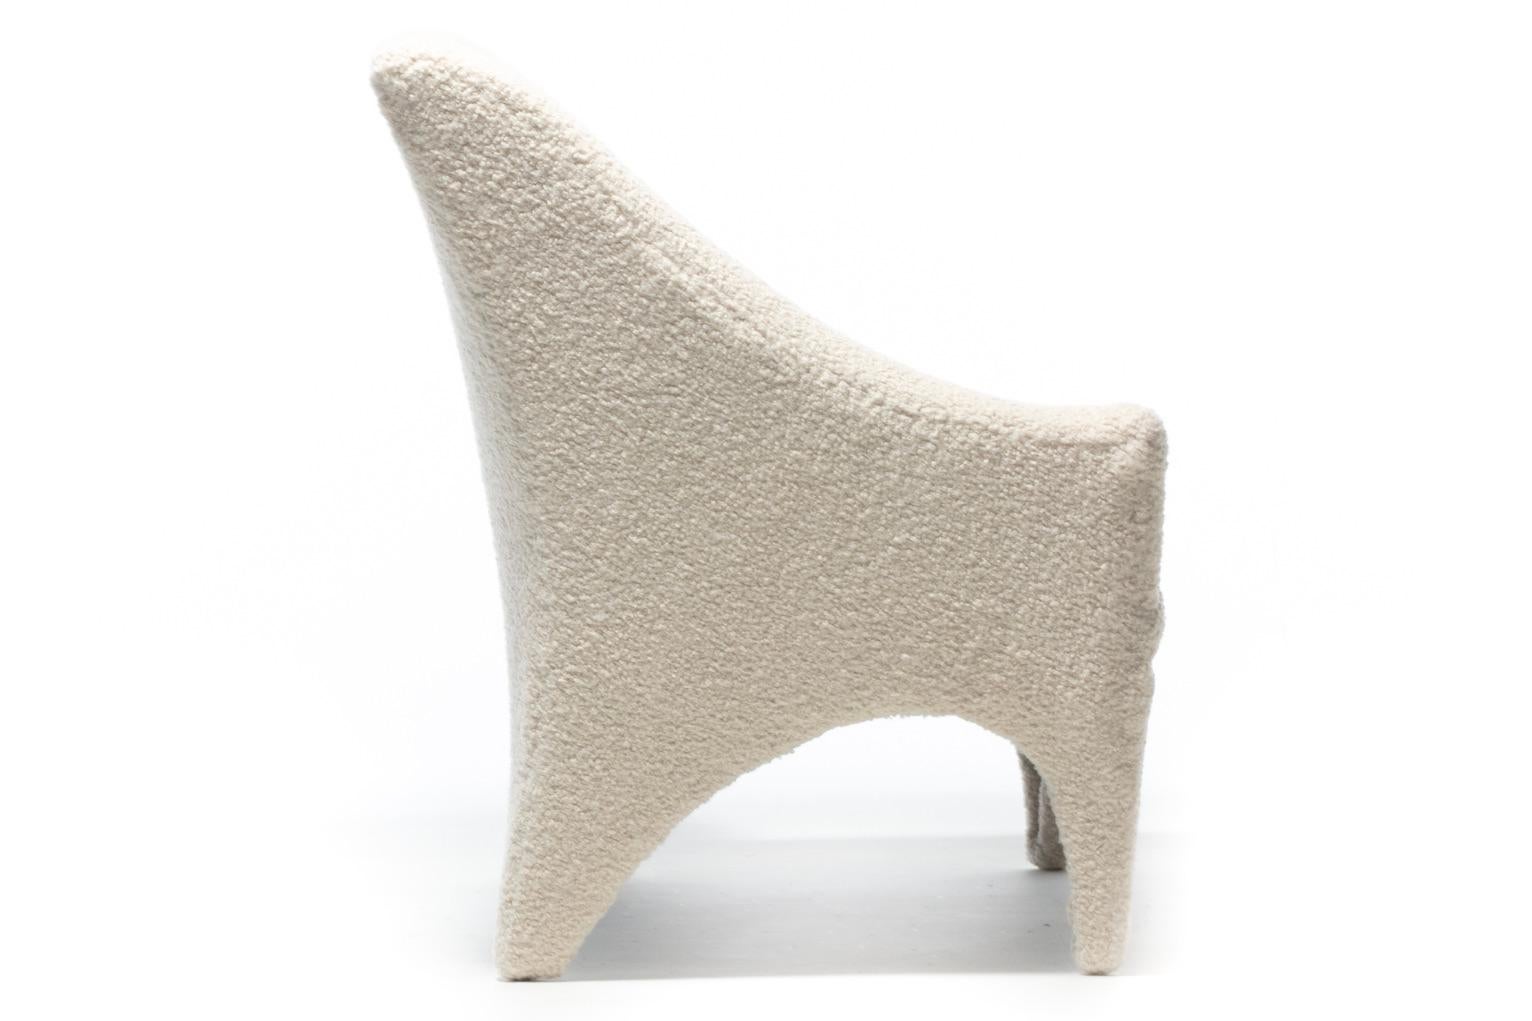 Vladimir Kagan A-Symmetric Settee in Ivory Bouclé by Directional, c. 1991 For Sale 6